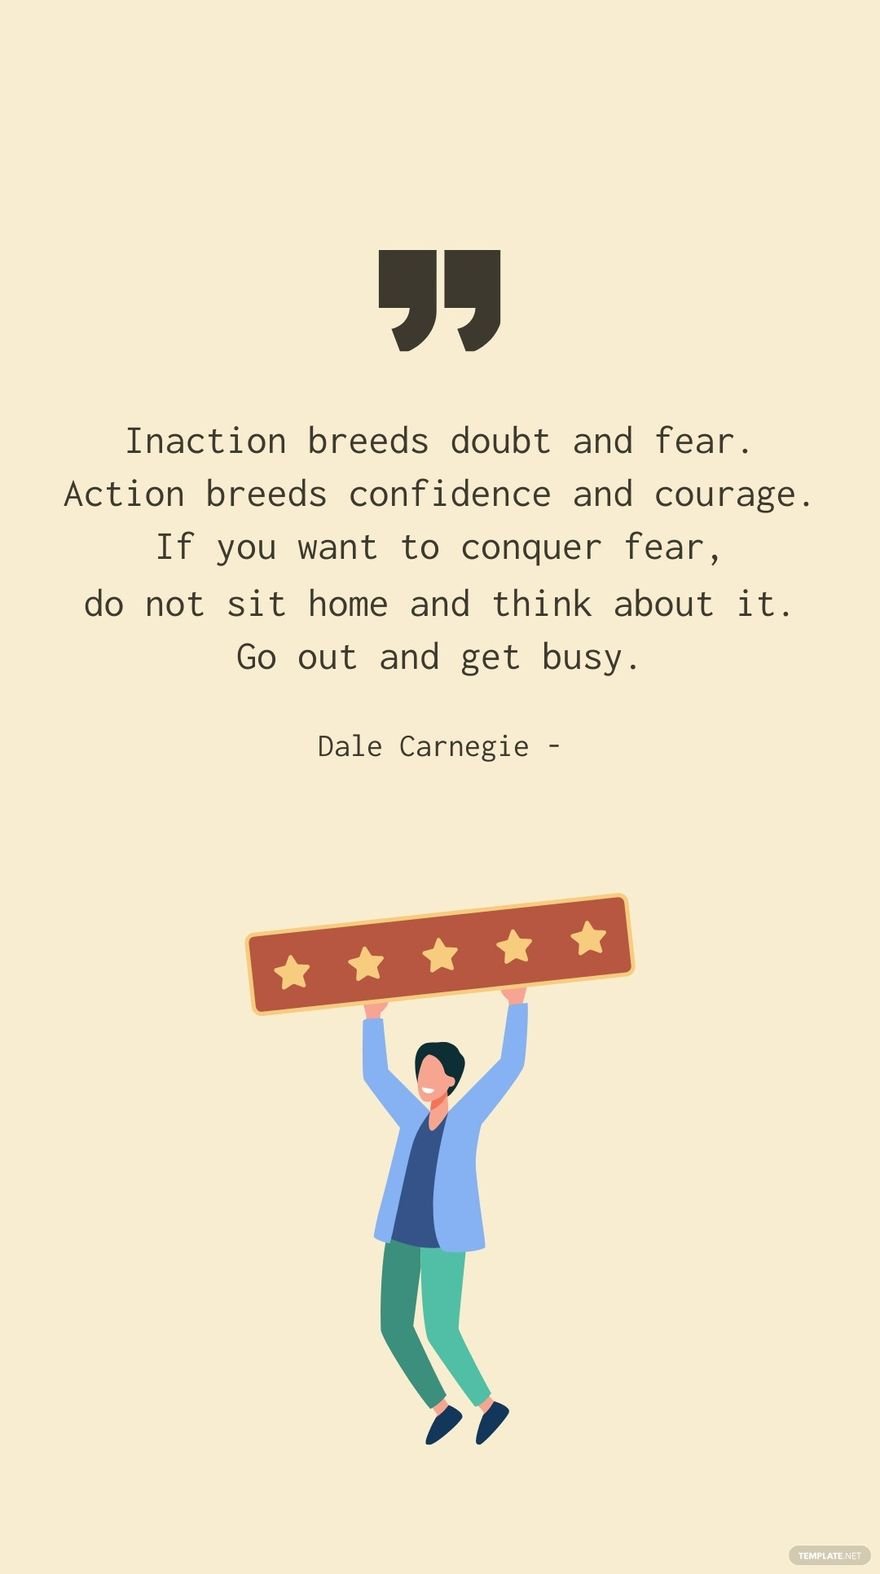 Dale Carnegie - Inaction breeds doubt and fear. Action breeds confidence and courage. If you want to conquer fear, do not sit home and think about it. Go out and get busy.